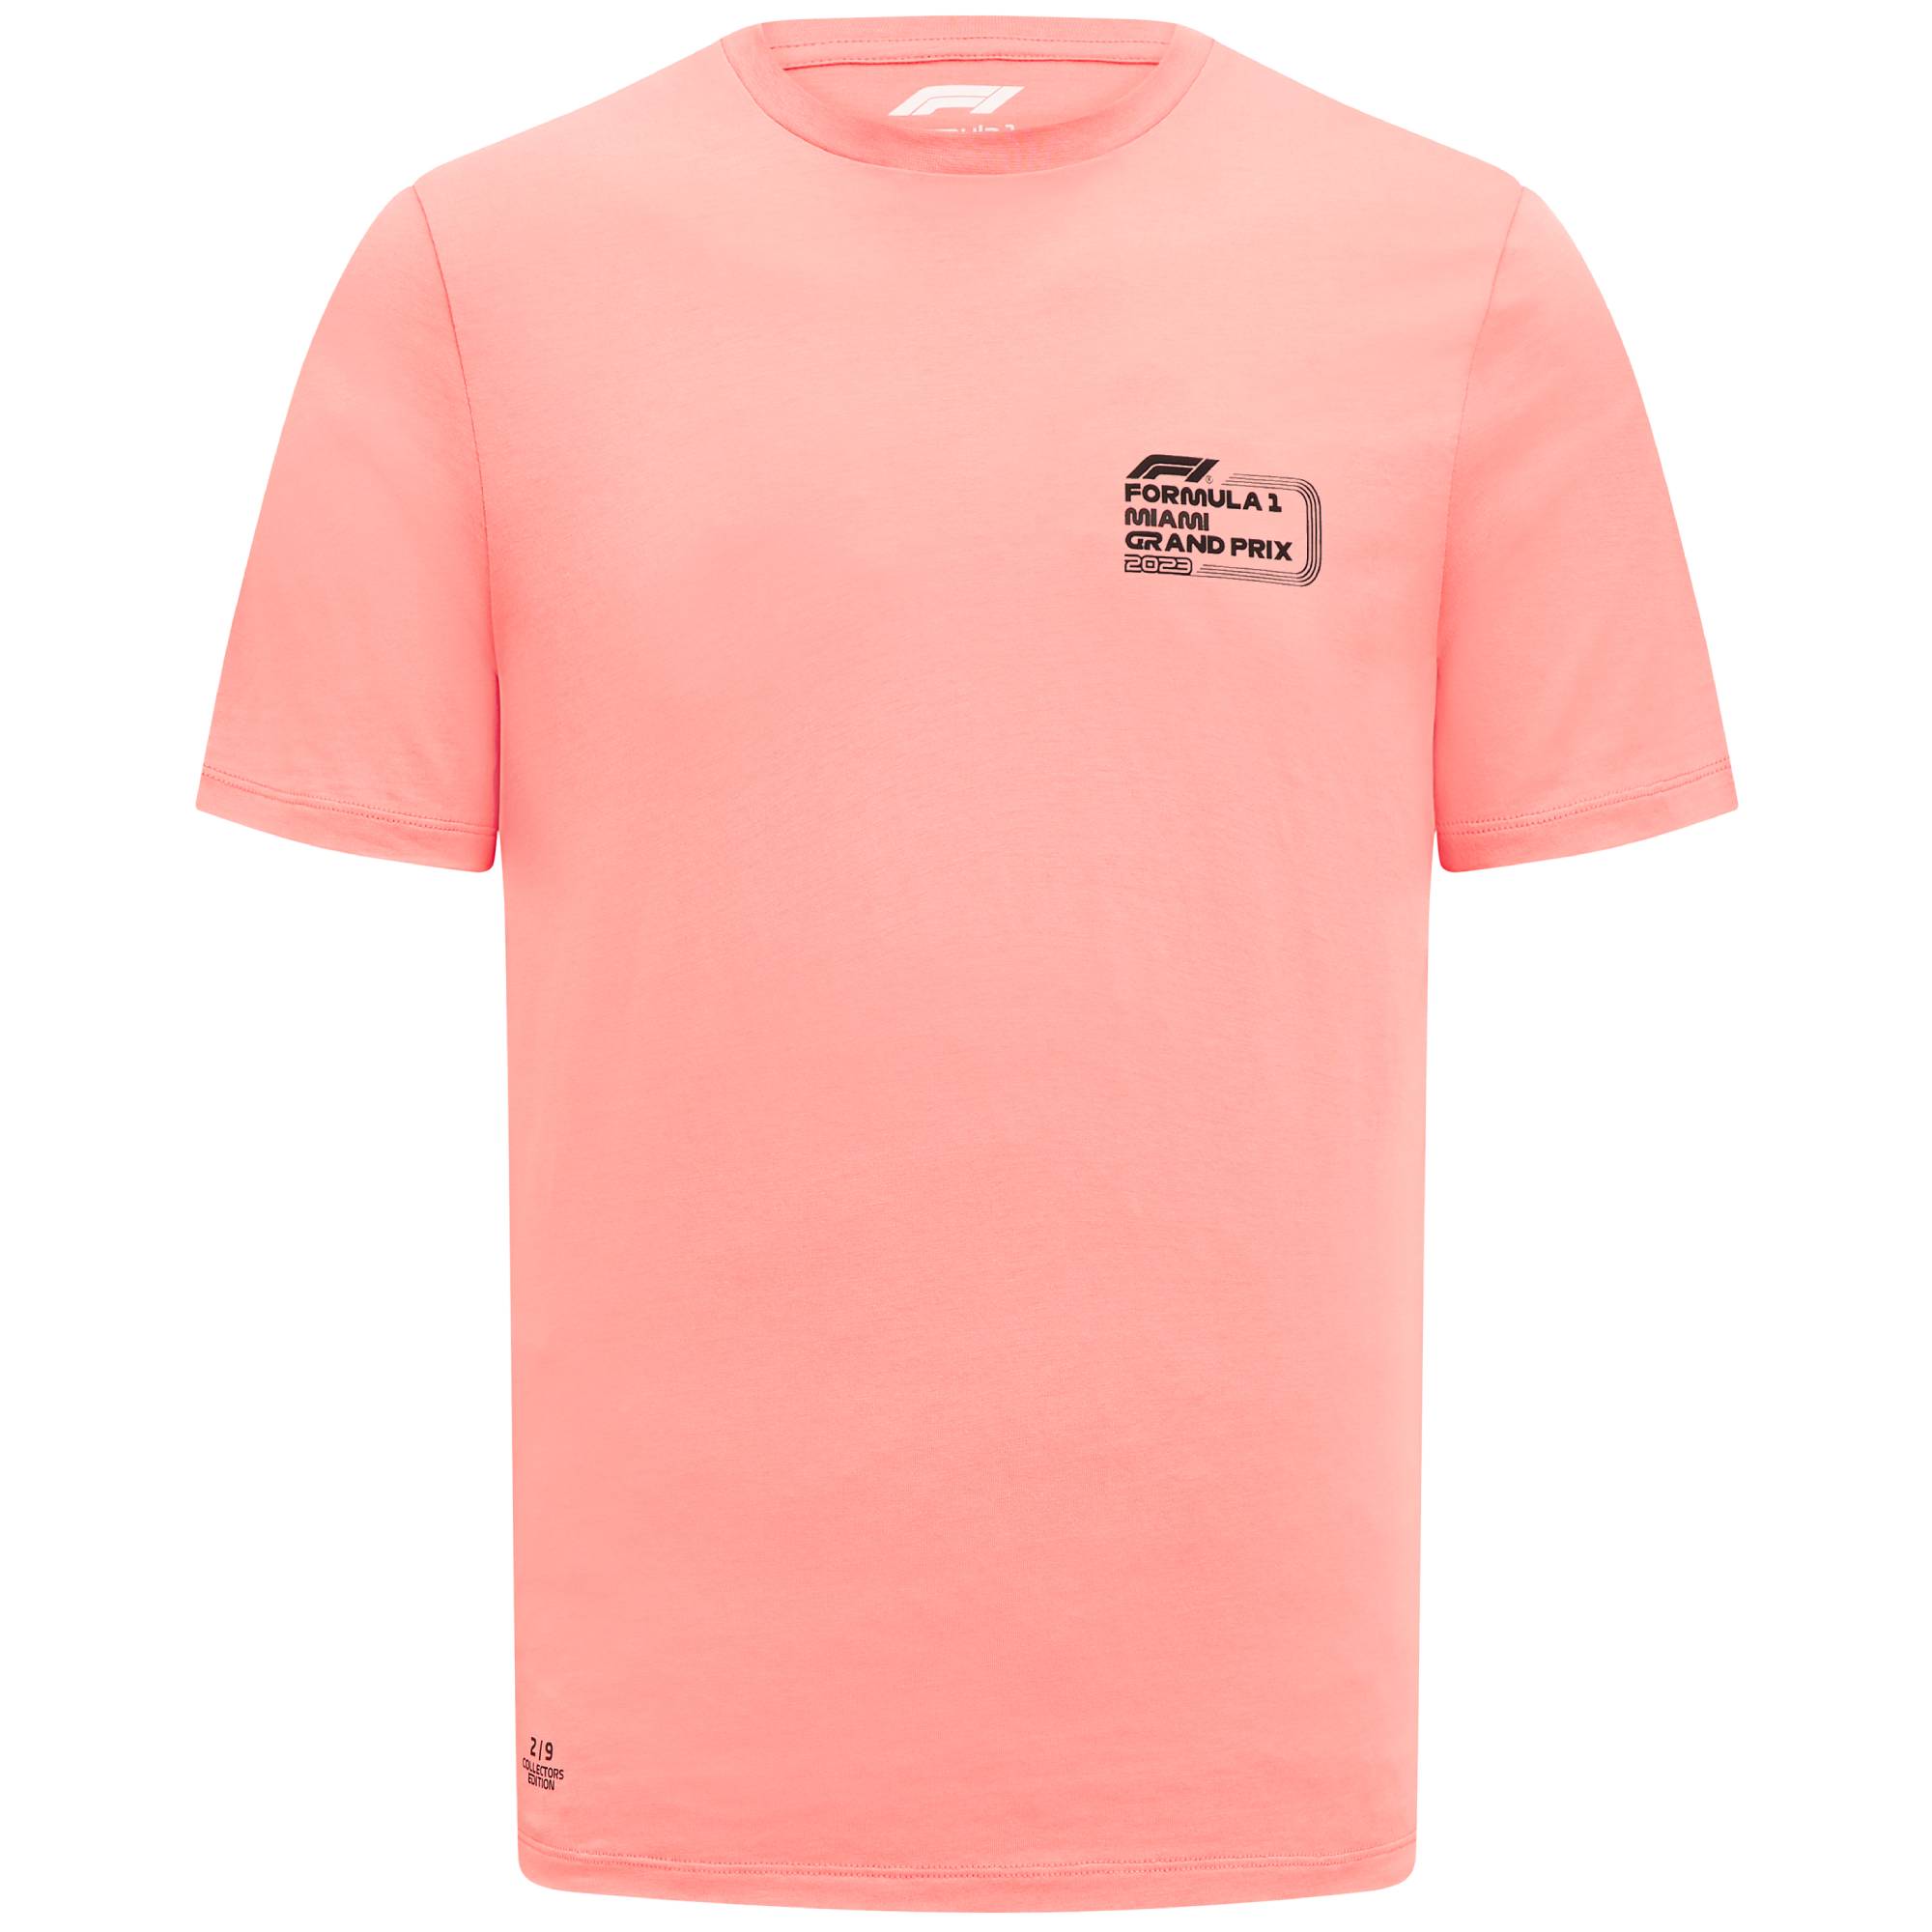 Formel 1 Collection T-Shirt "Miami" - pink